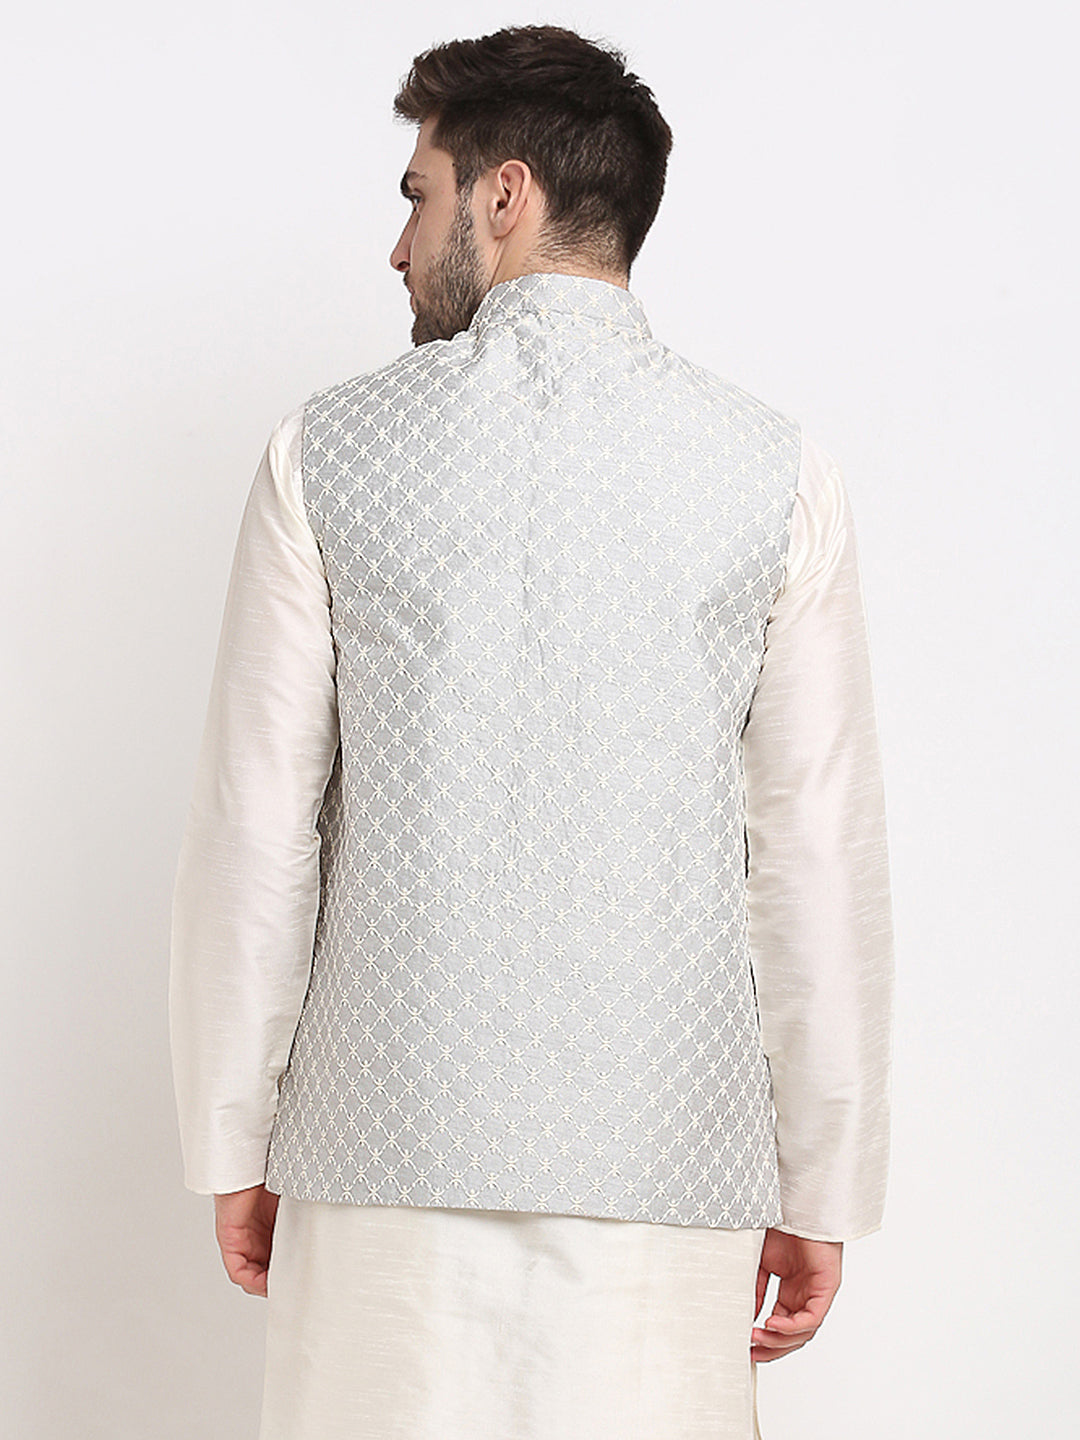 Jompers Men's Grey Grey and White Embroidered Nehru Jacket